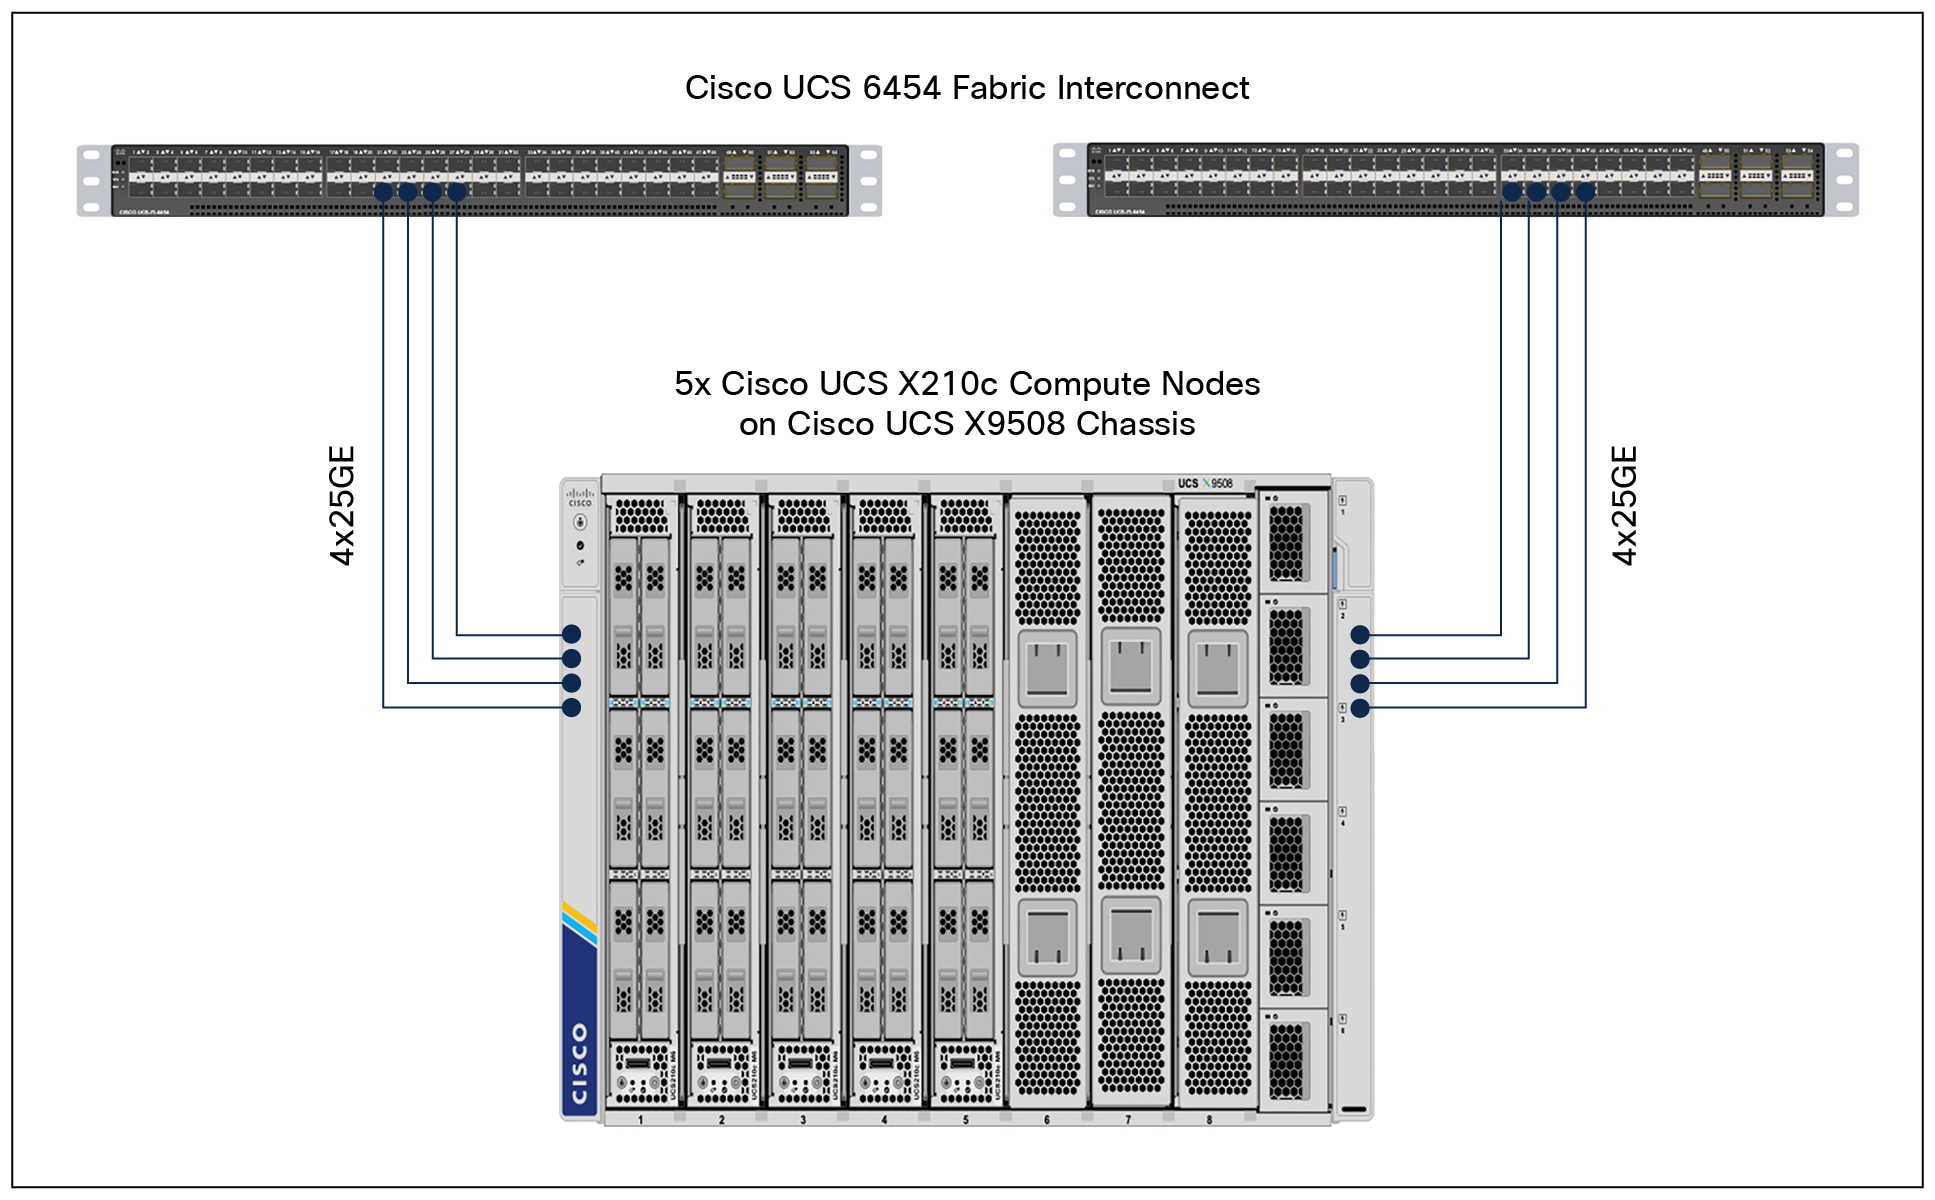 Cisco UCS X9508 Server Chassis connectivity to Cisco UCS fabric interconnects